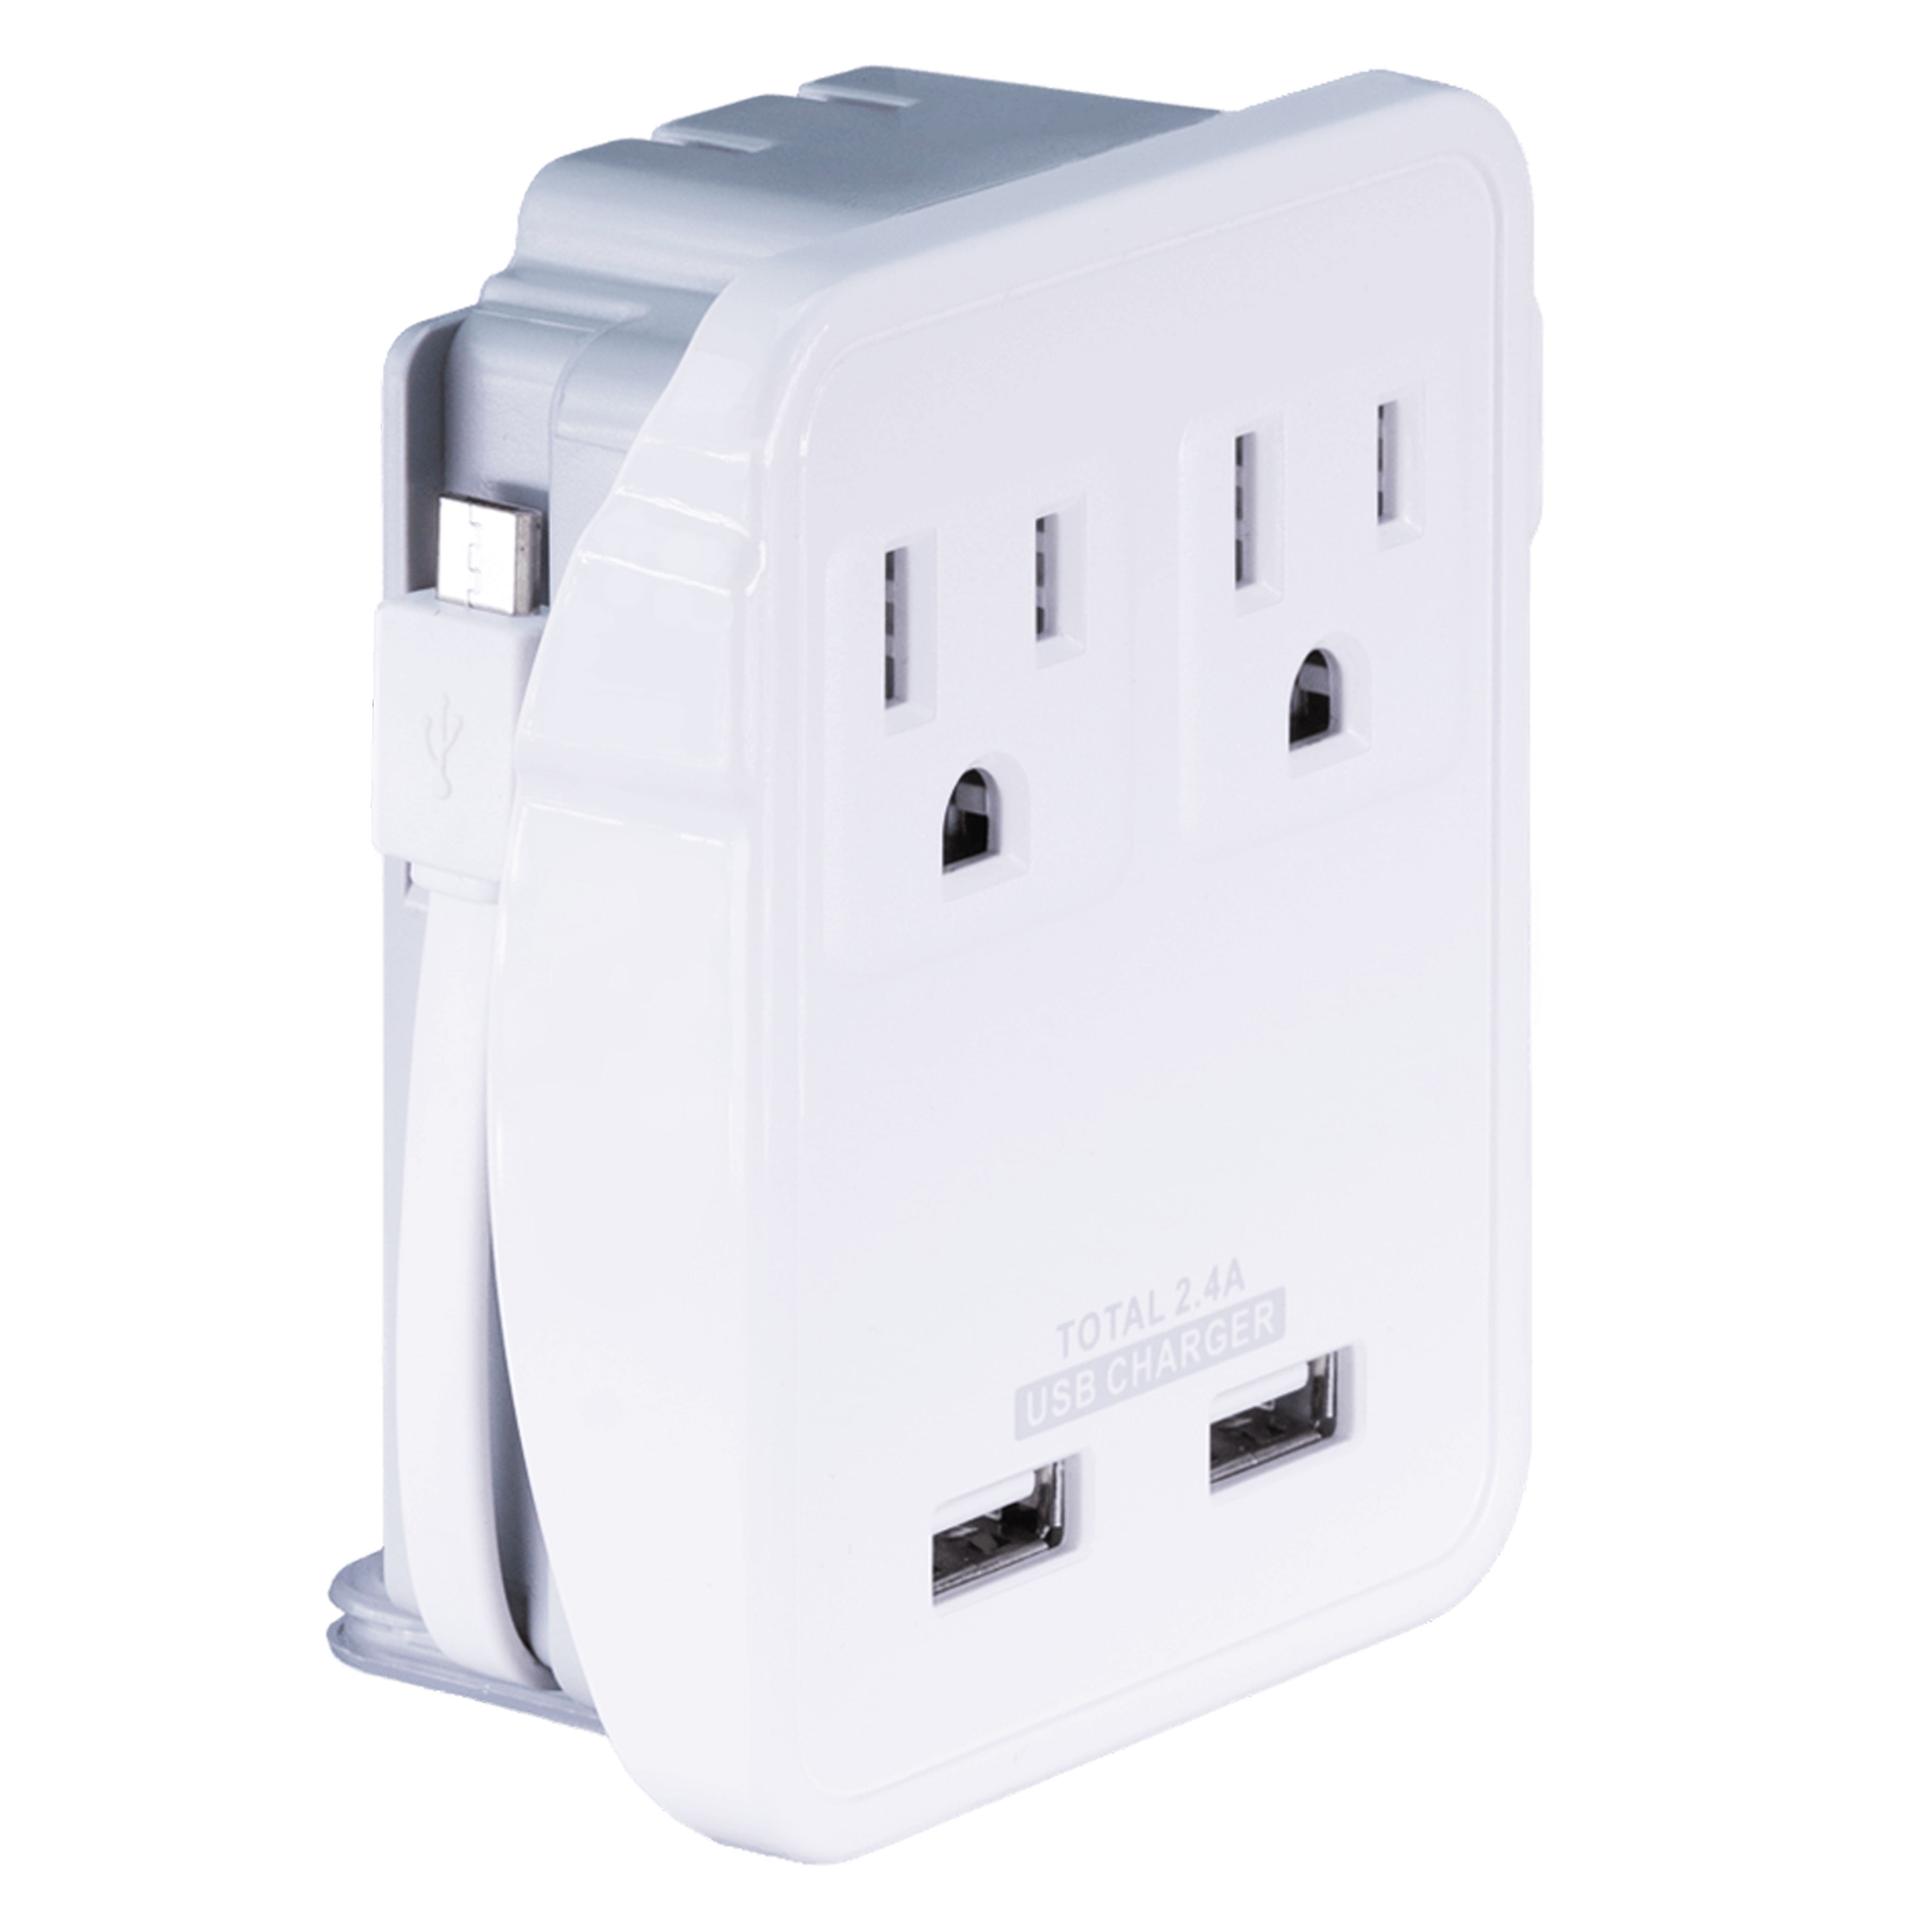 2-WAY UK MAINS ADAPTOR WITH DUAL USB PORTS SOCKET EXTENSION CHARGER 